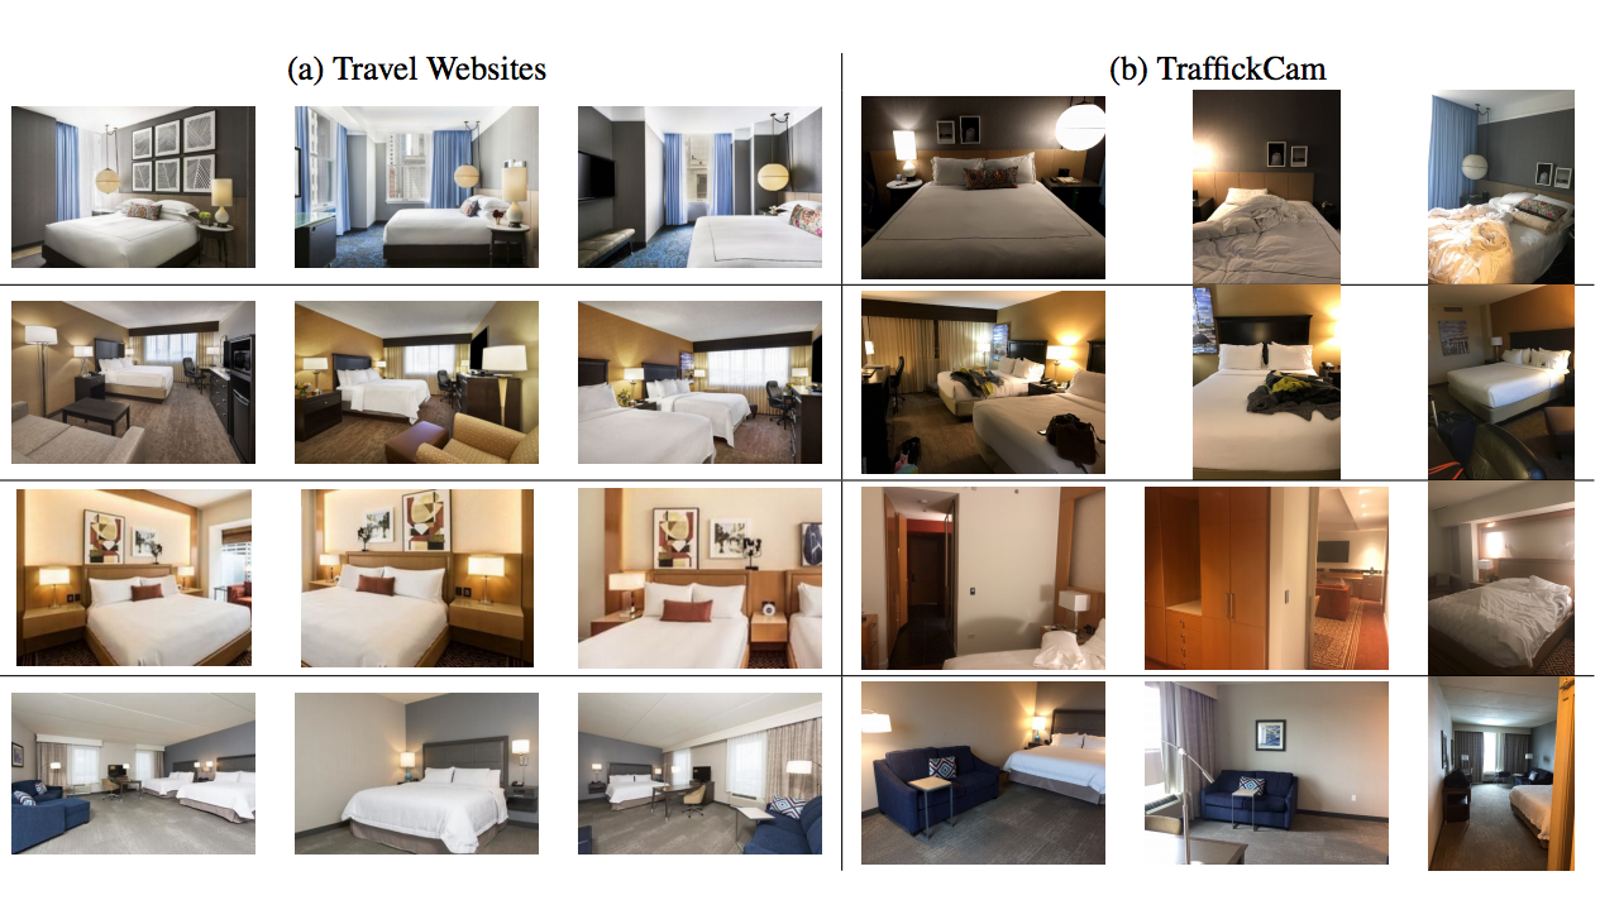 Researchers Create HotelRecognition System to Aid Human Trafficking